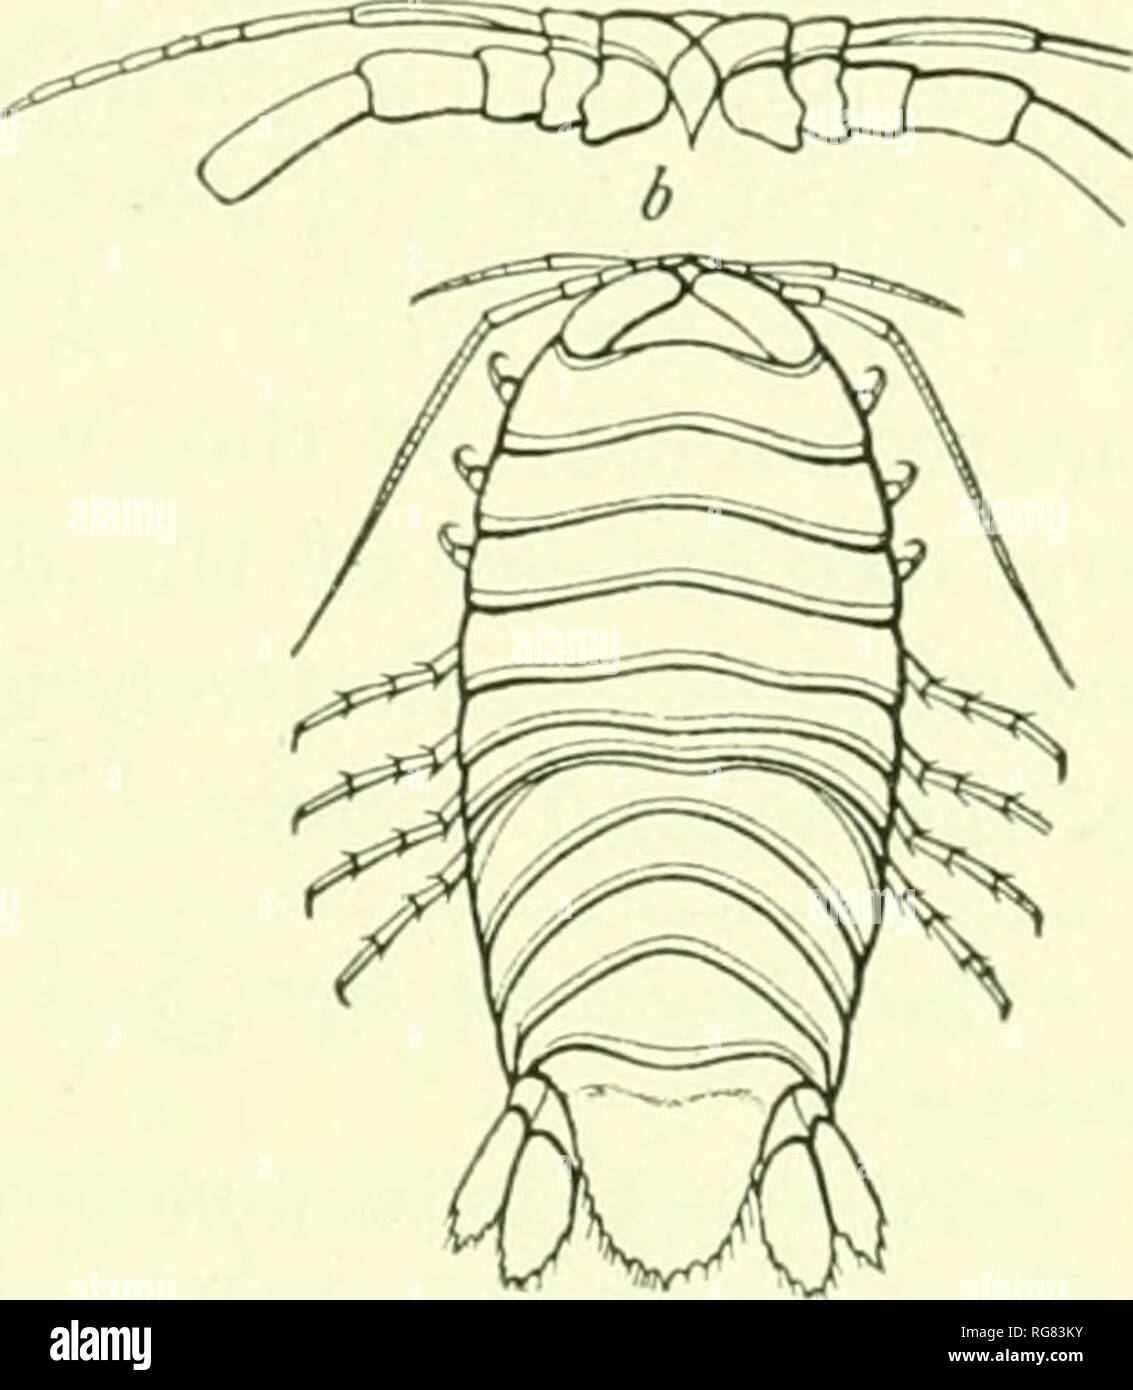 . Bulletin - United States National Museum. Science. ISOPODS OF NORTH AMERICA. 179 i^GA DENTATA Schicedte and Meinert. jEga dentata y&lt;nicKi)TE and Meinekt, Naturh. Tidsskr. (3), XII, 1879-80, pp. 372-873, pi. X, figs. 11-12.—Richardson, Proc. V. S. Nat. Mus., XXIII, 1901, p. 52*2. Locality.—Cuba. Body ovate, punctate on the dorsal surface with minute scattered dots. Front of head hisiiiuate, the median point separating' and extending- half tlie length of the first article of the first pair of antenna?. The frontal hunina is rhomboid in shape. The e^'es are large, oblong, posteriorly acumina Stock Photo